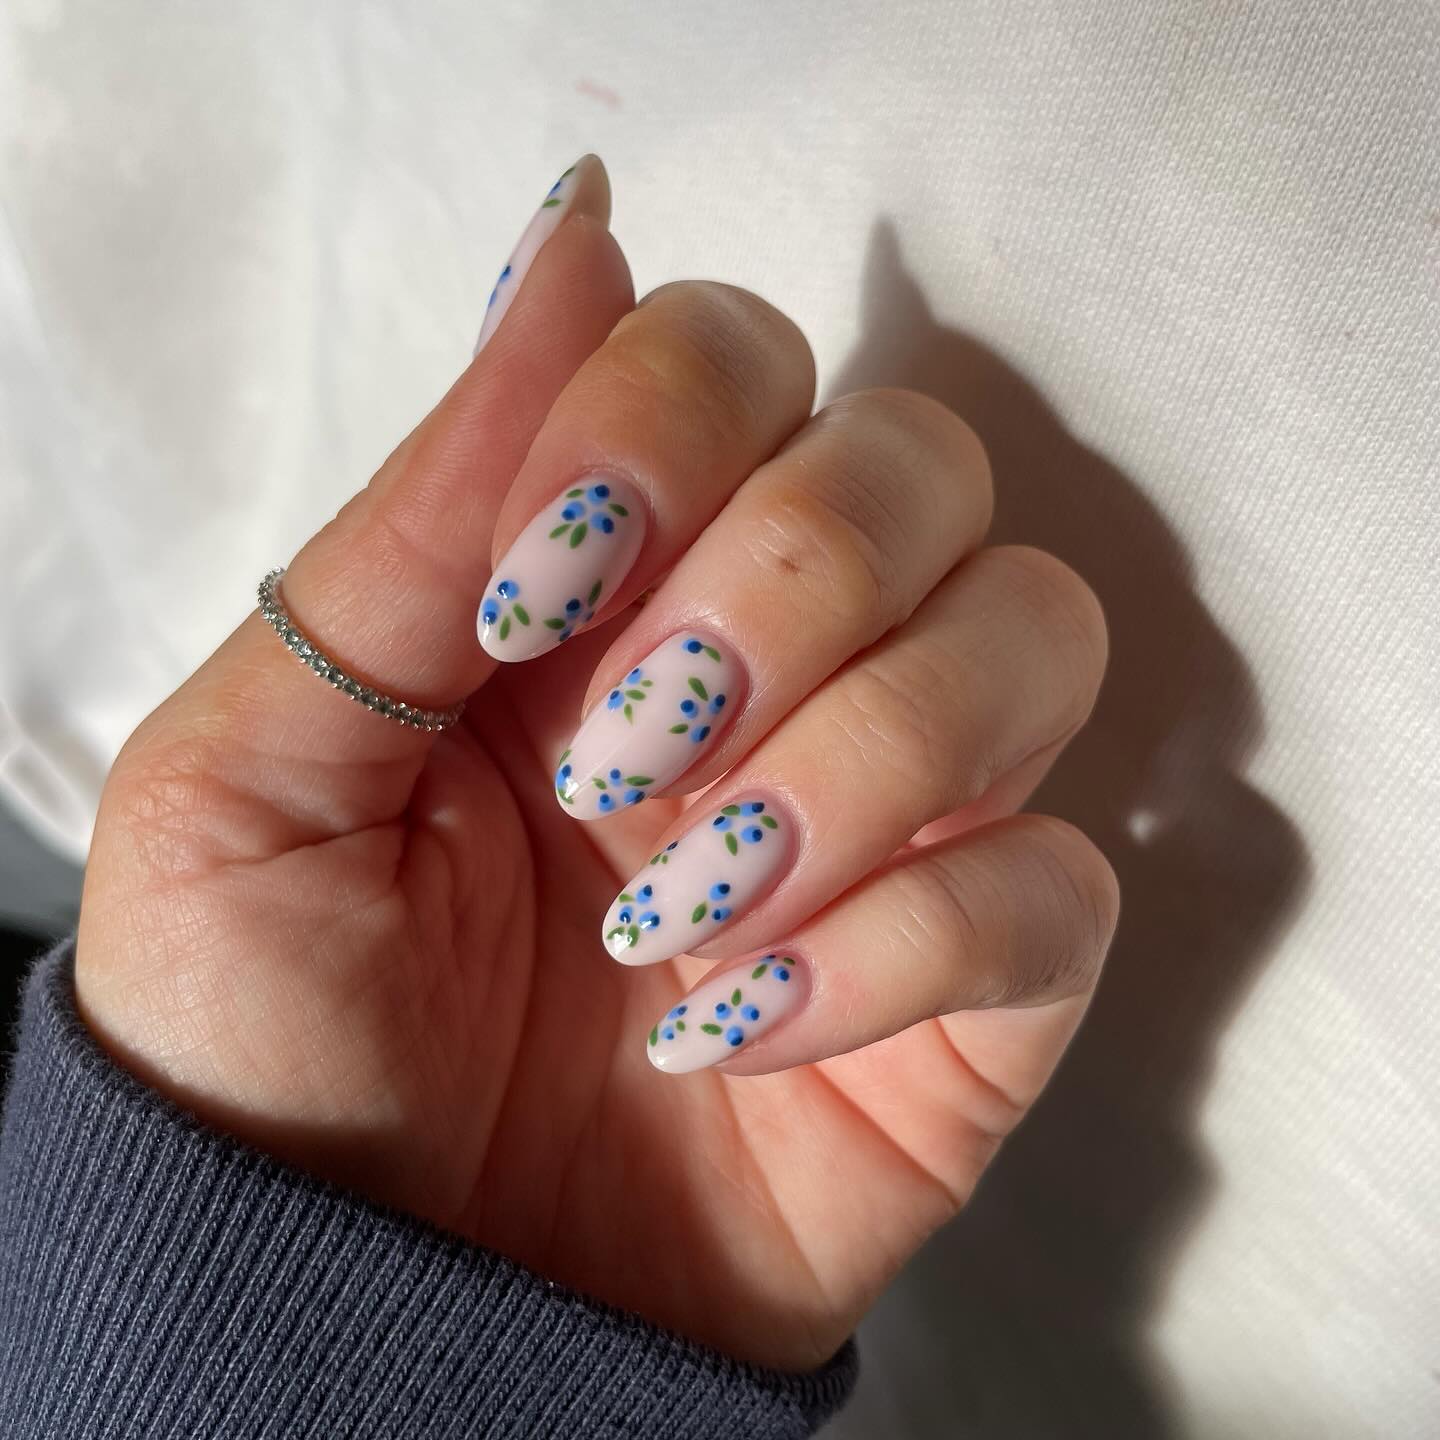 100+ Short Nail Designs You’ll Want To Try This Year images 60